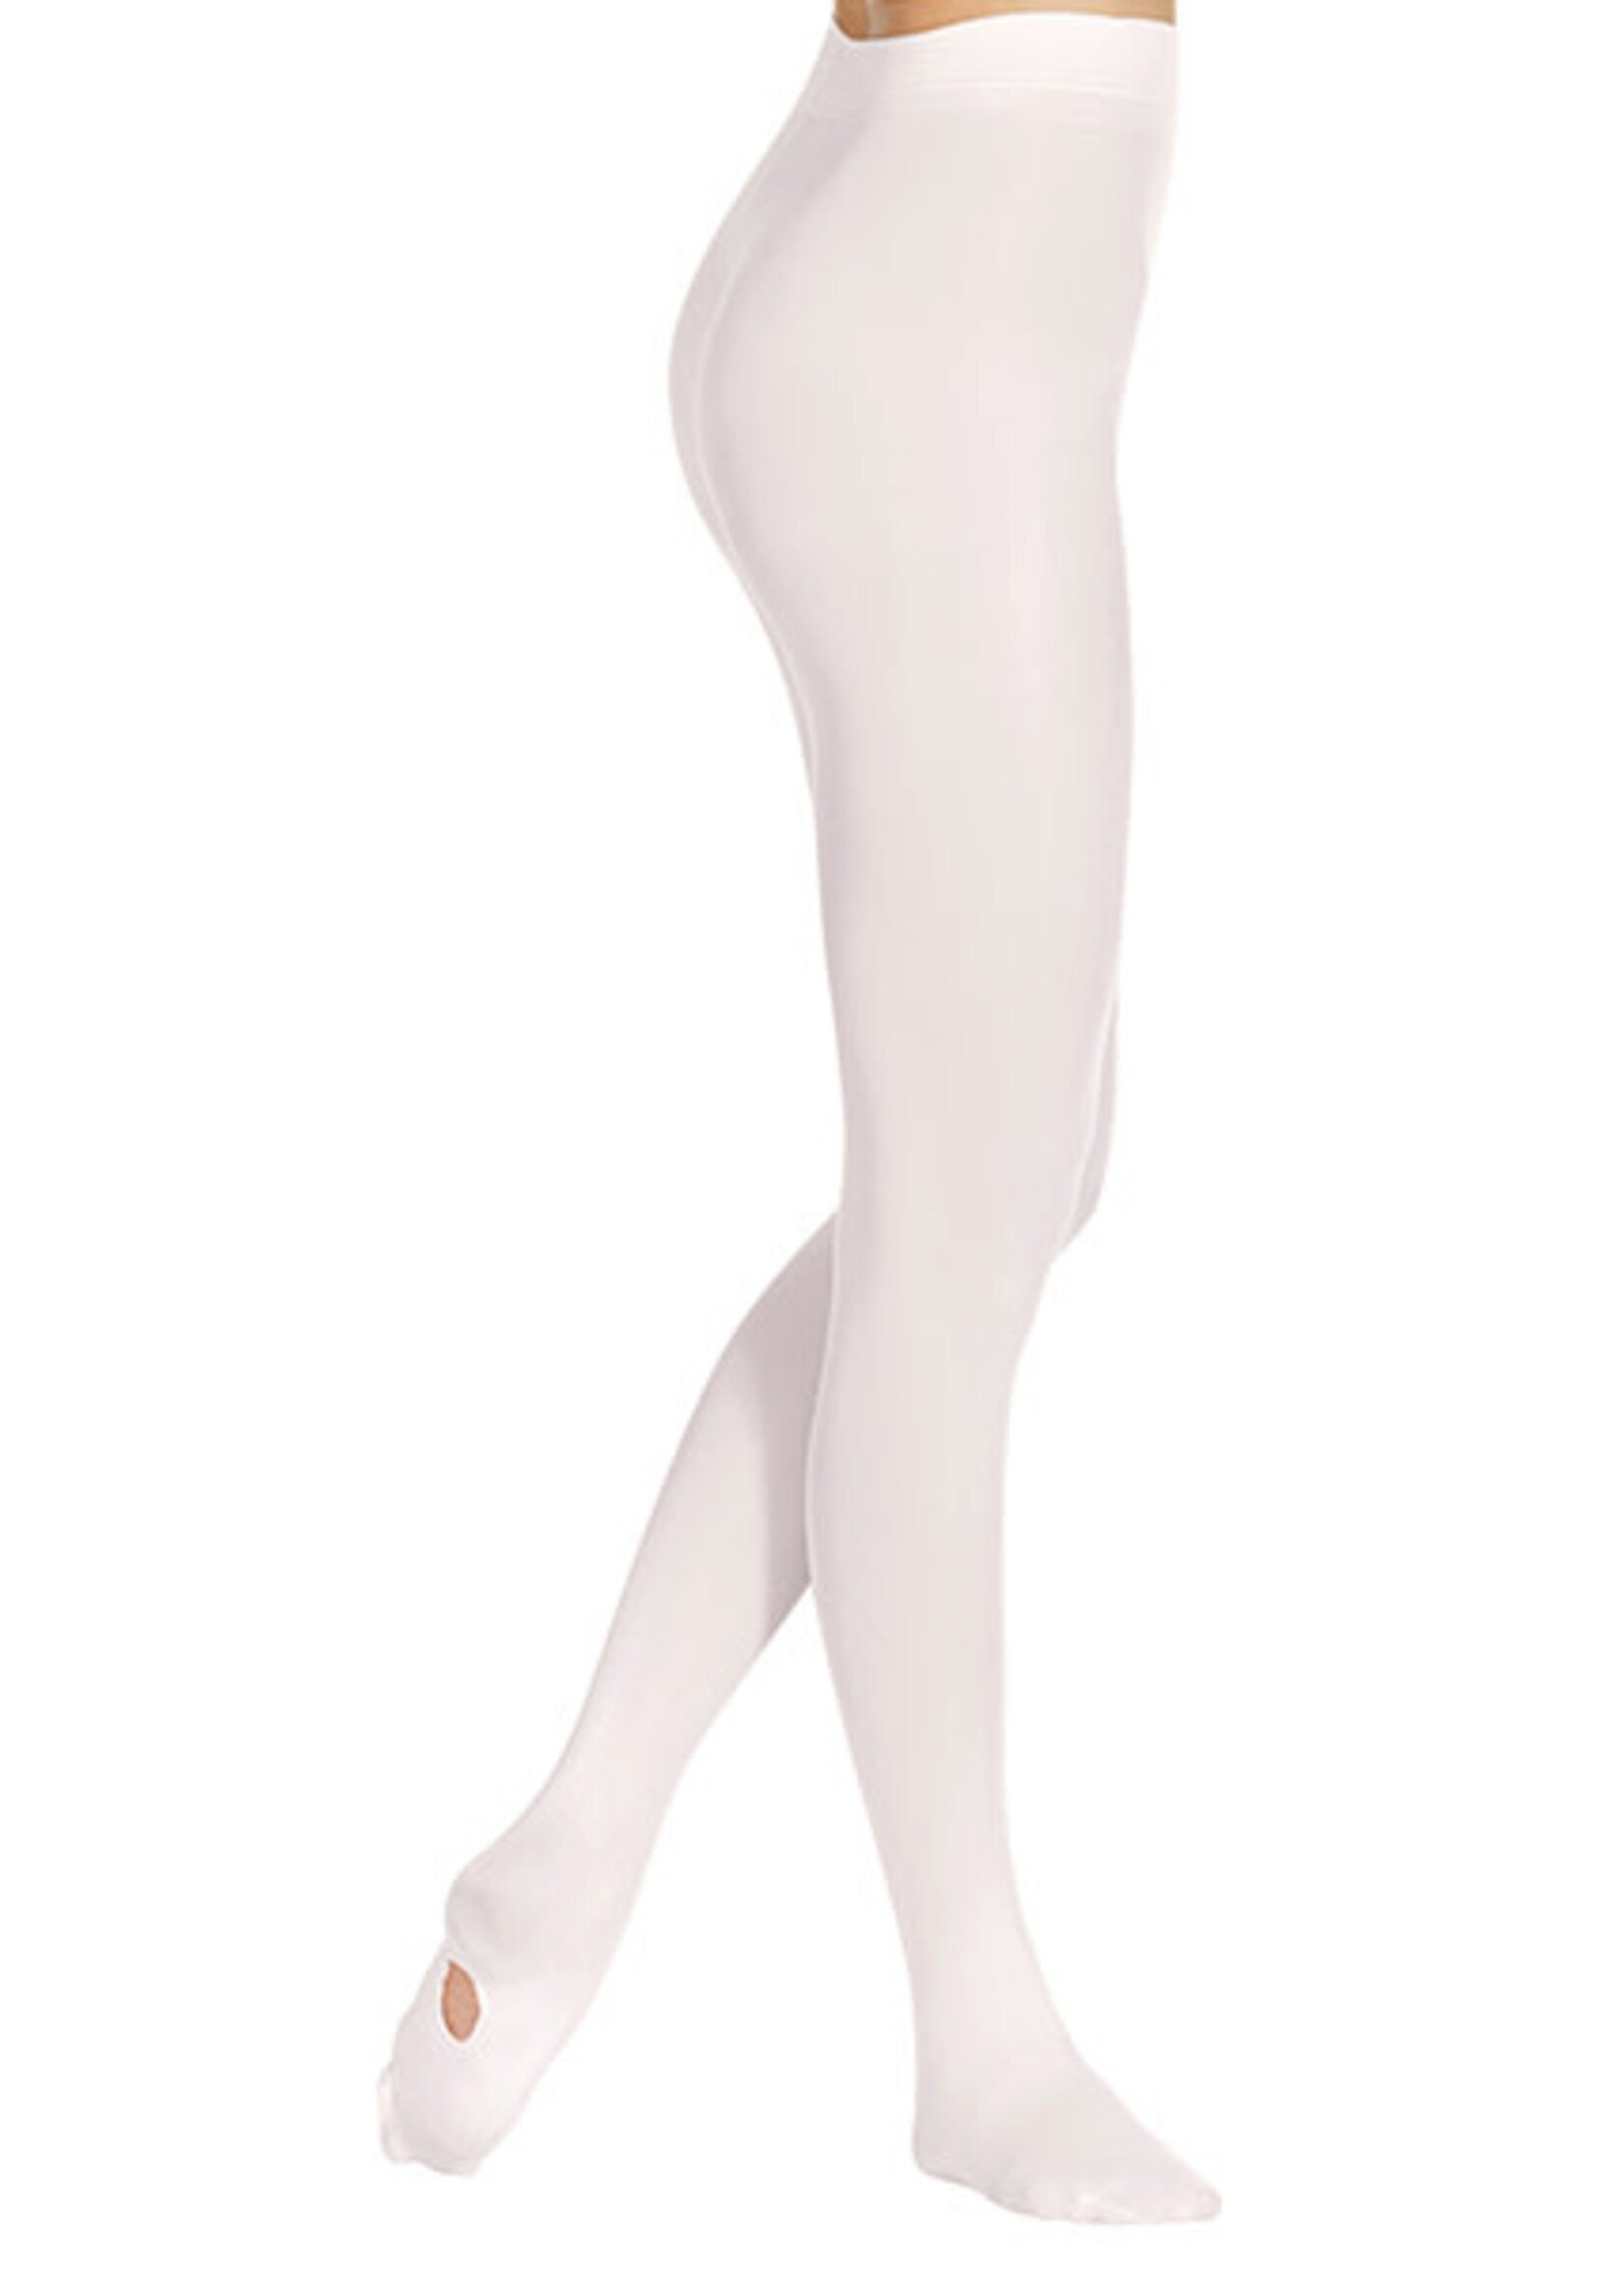 210C  EuroSkins Child Convertible Tights WHITE